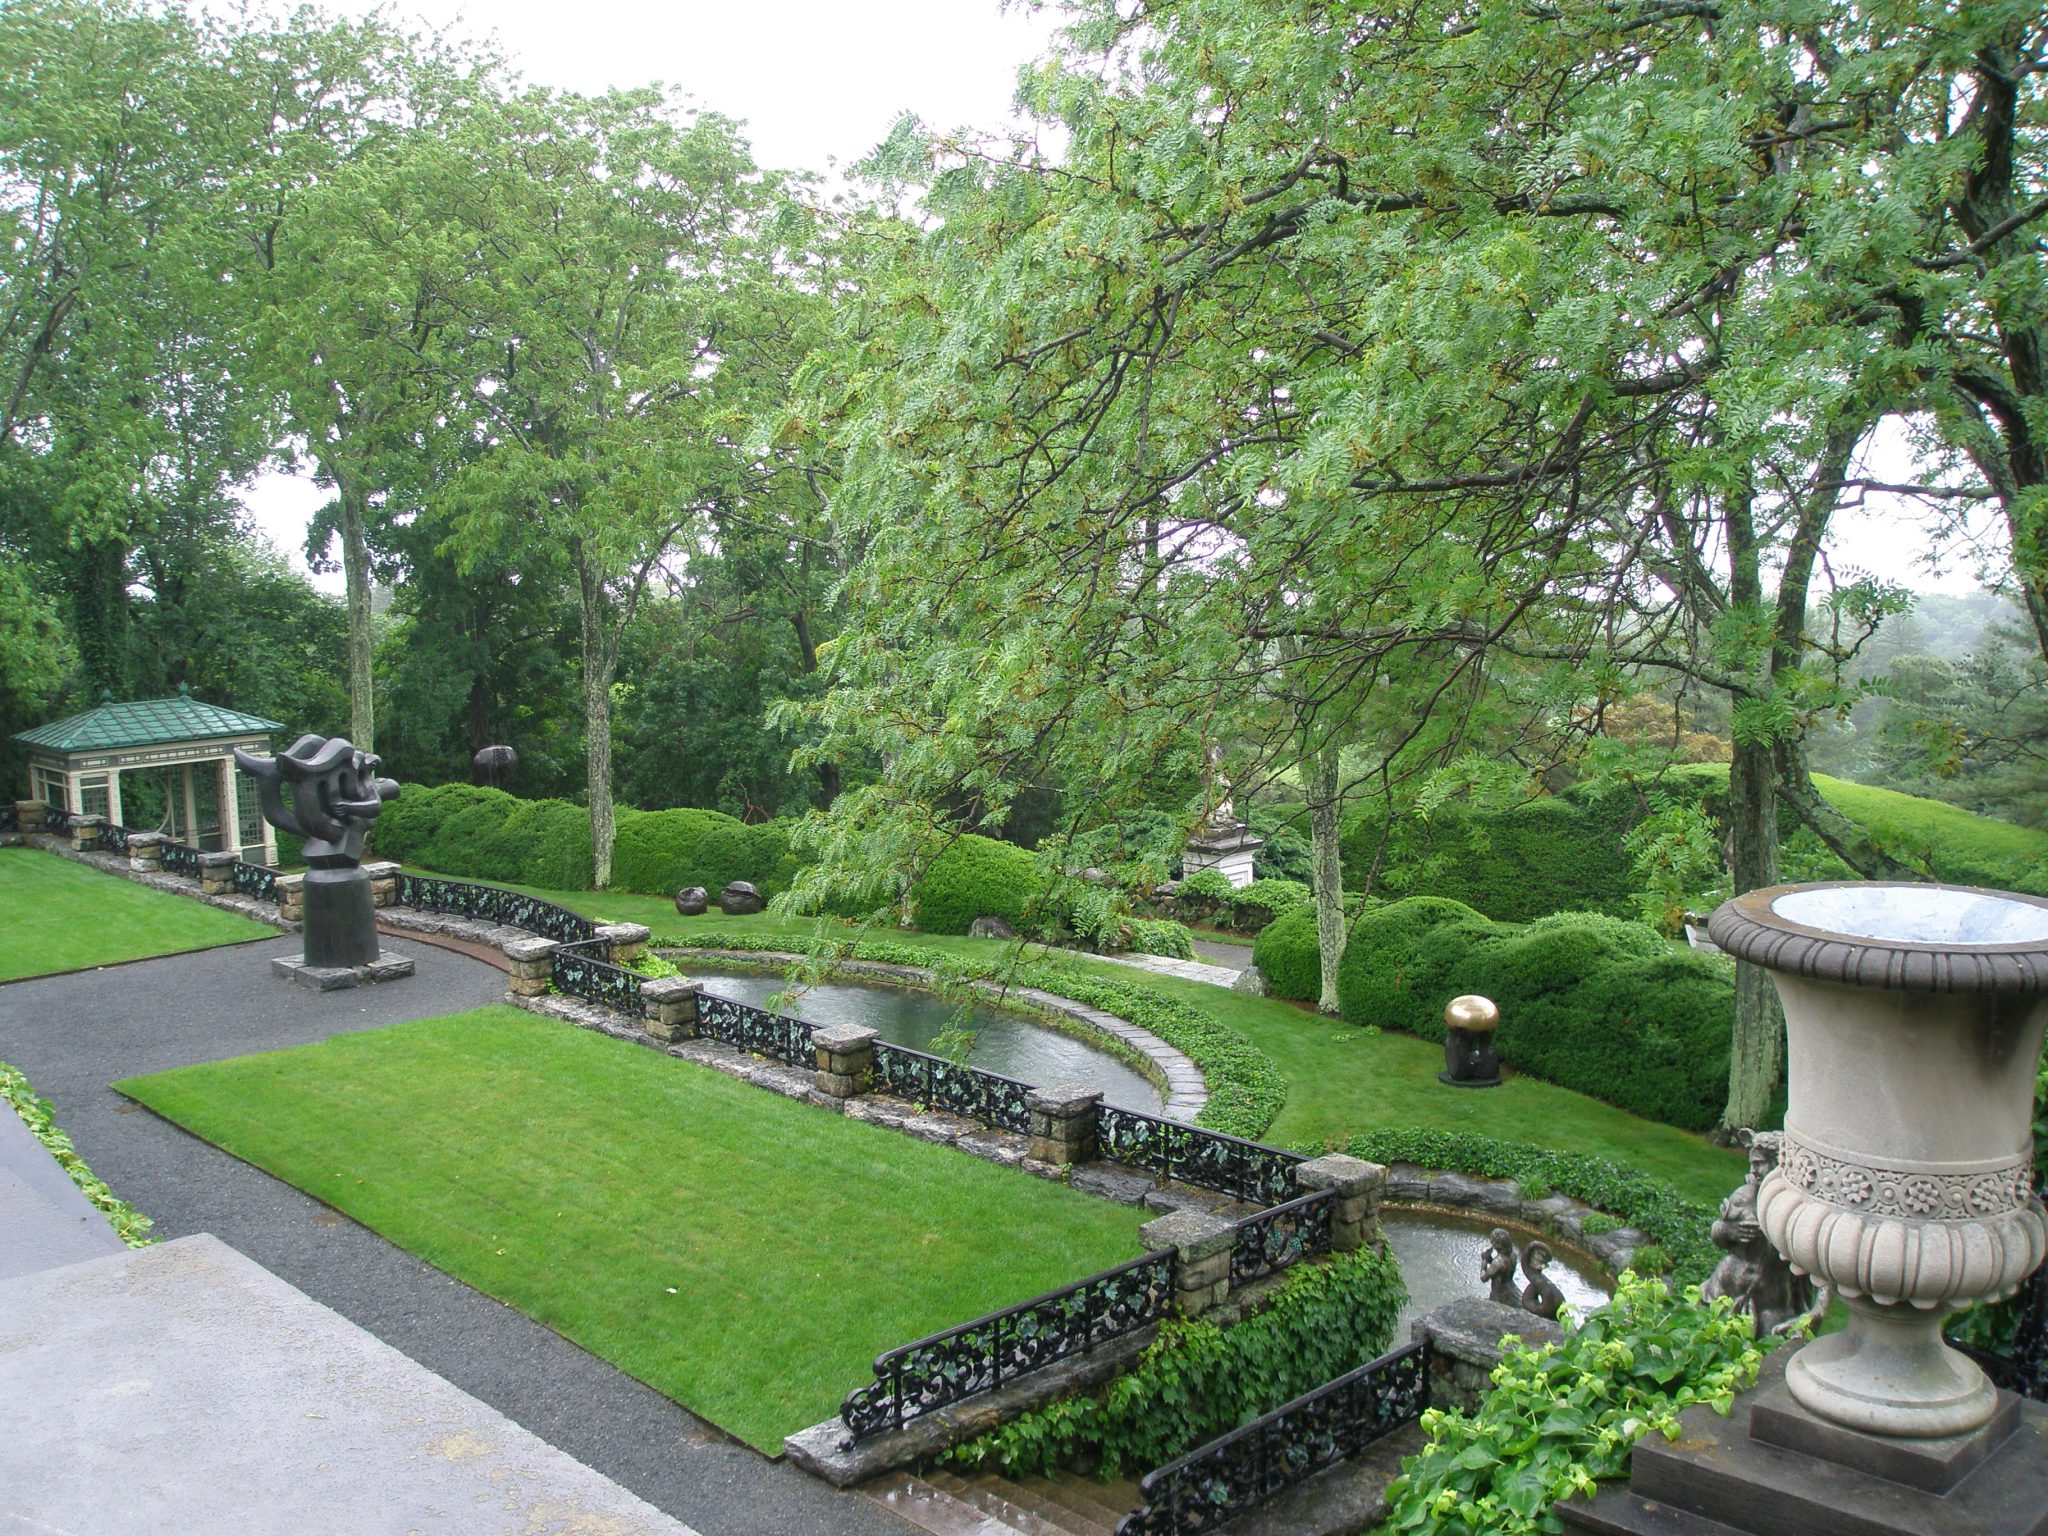 At the northwest corner of the West Porch: the view down over the Orange Tree Terrace, with the Swimming Pool Terrace below that. The winged, black sculpture is by Jacques Lipchitz: THE SONG OF THE VOWELS (1932)